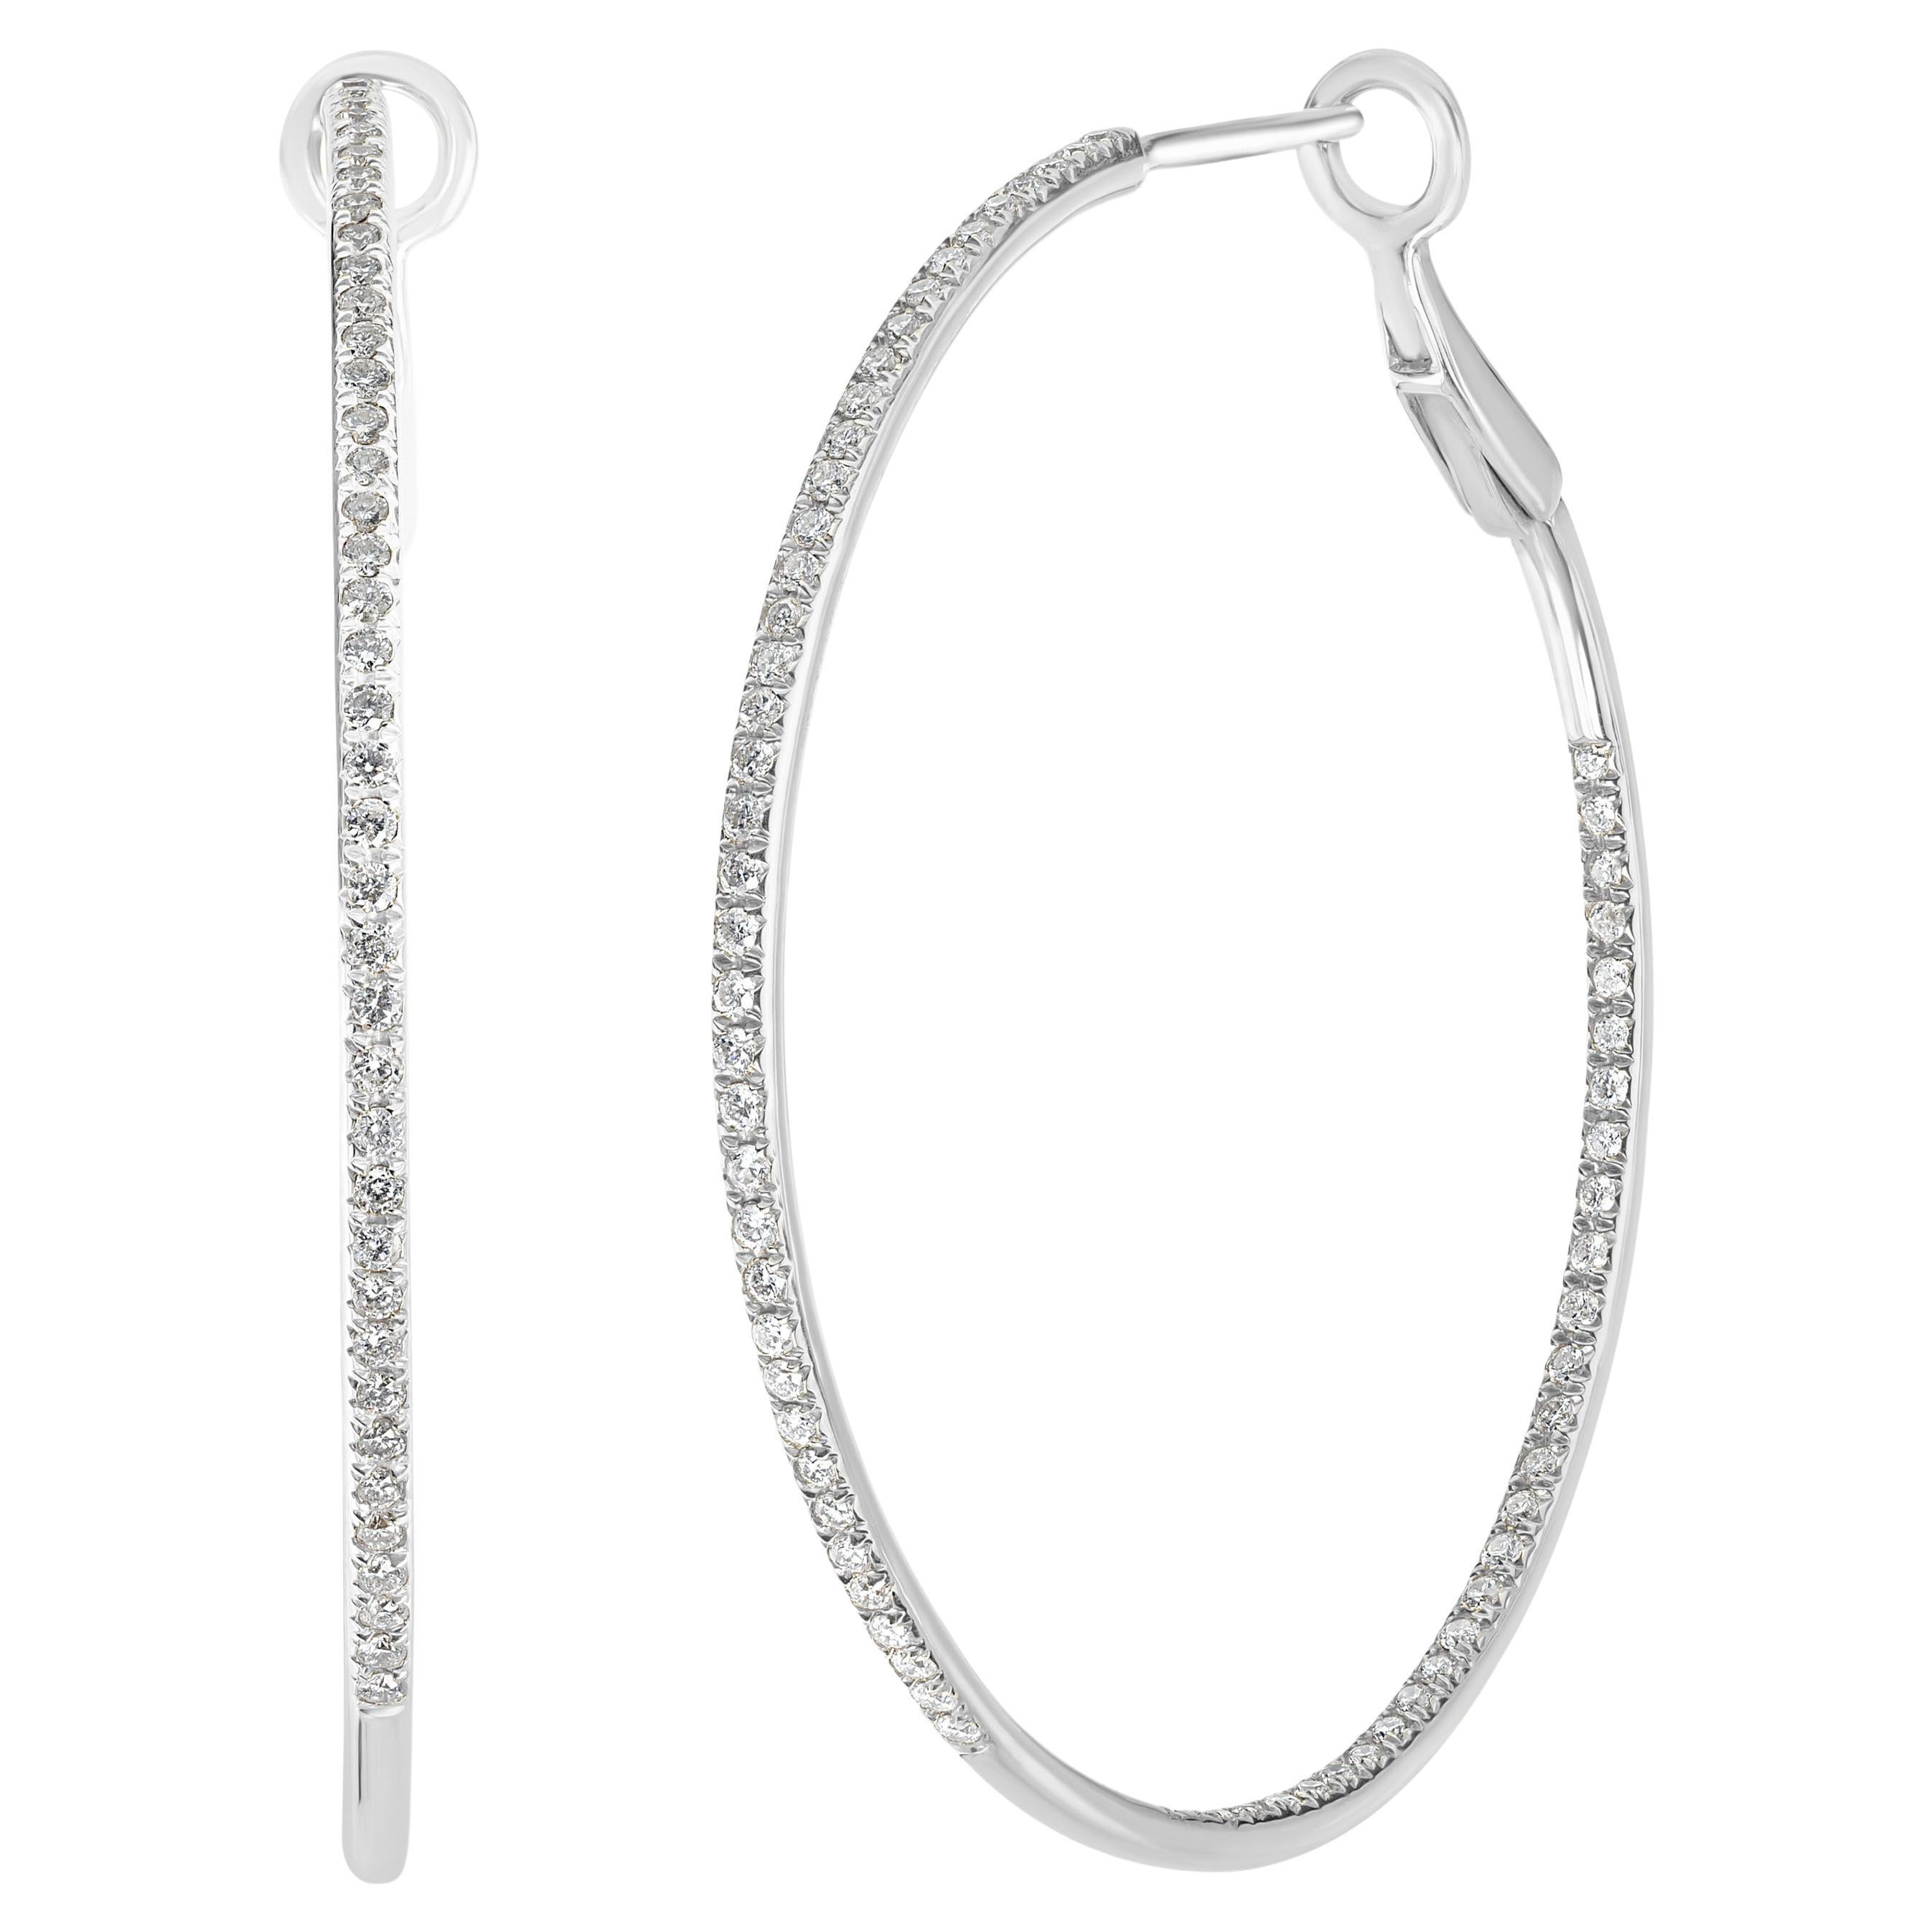 1/4Ct Round Cut Pave Natural Diamond 14k White Gold Inside Outside Hoop Earrings